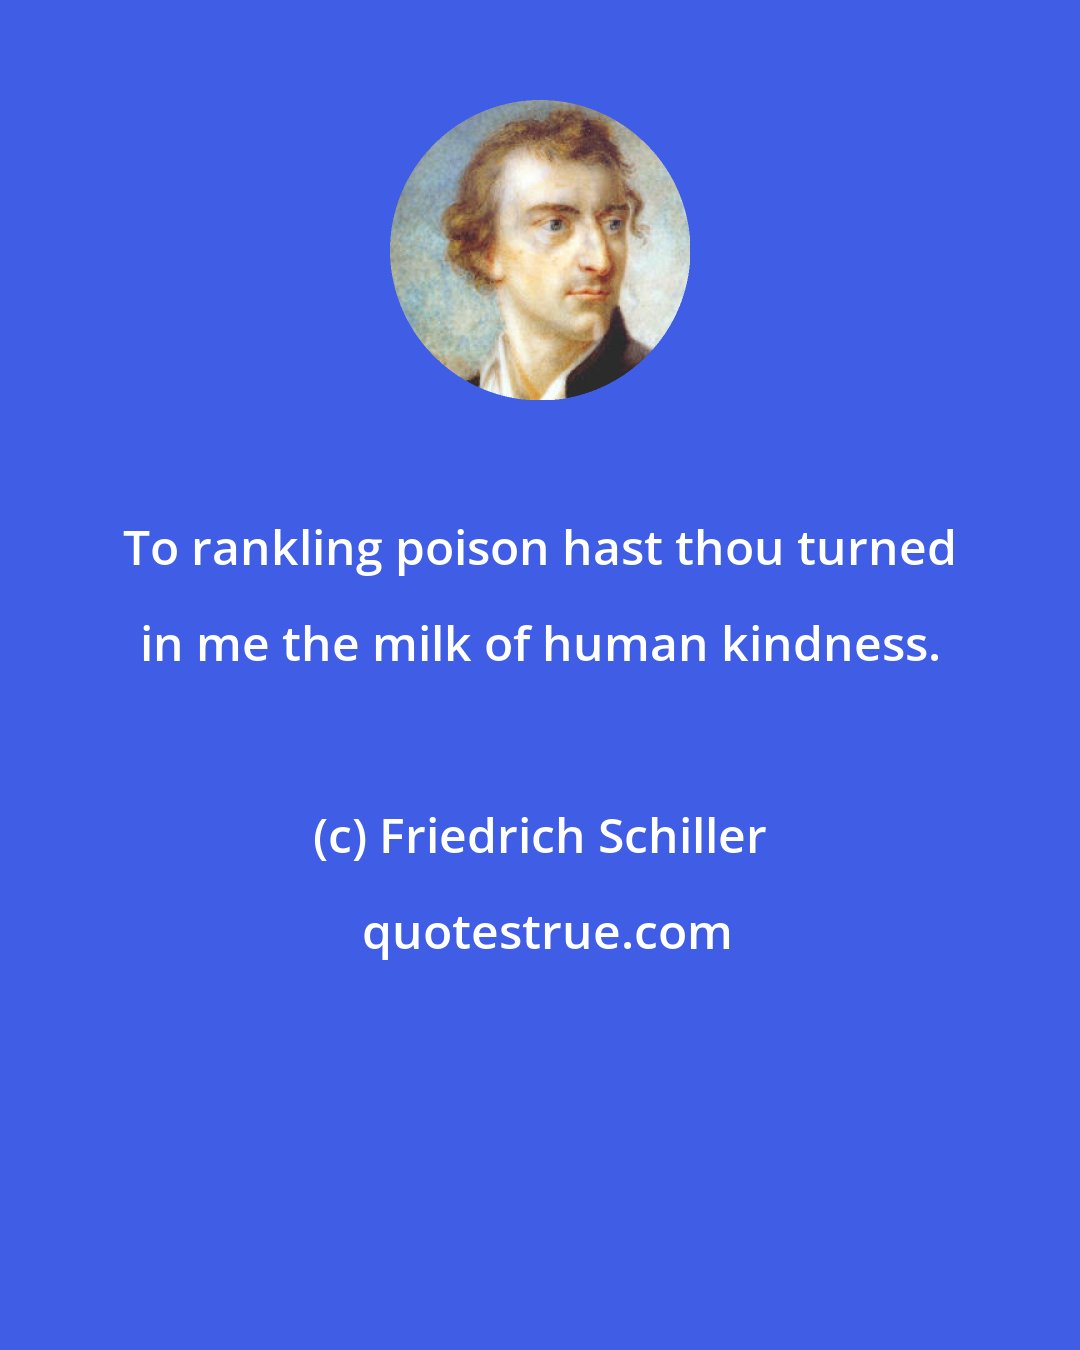 Friedrich Schiller: To rankling poison hast thou turned in me the milk of human kindness.